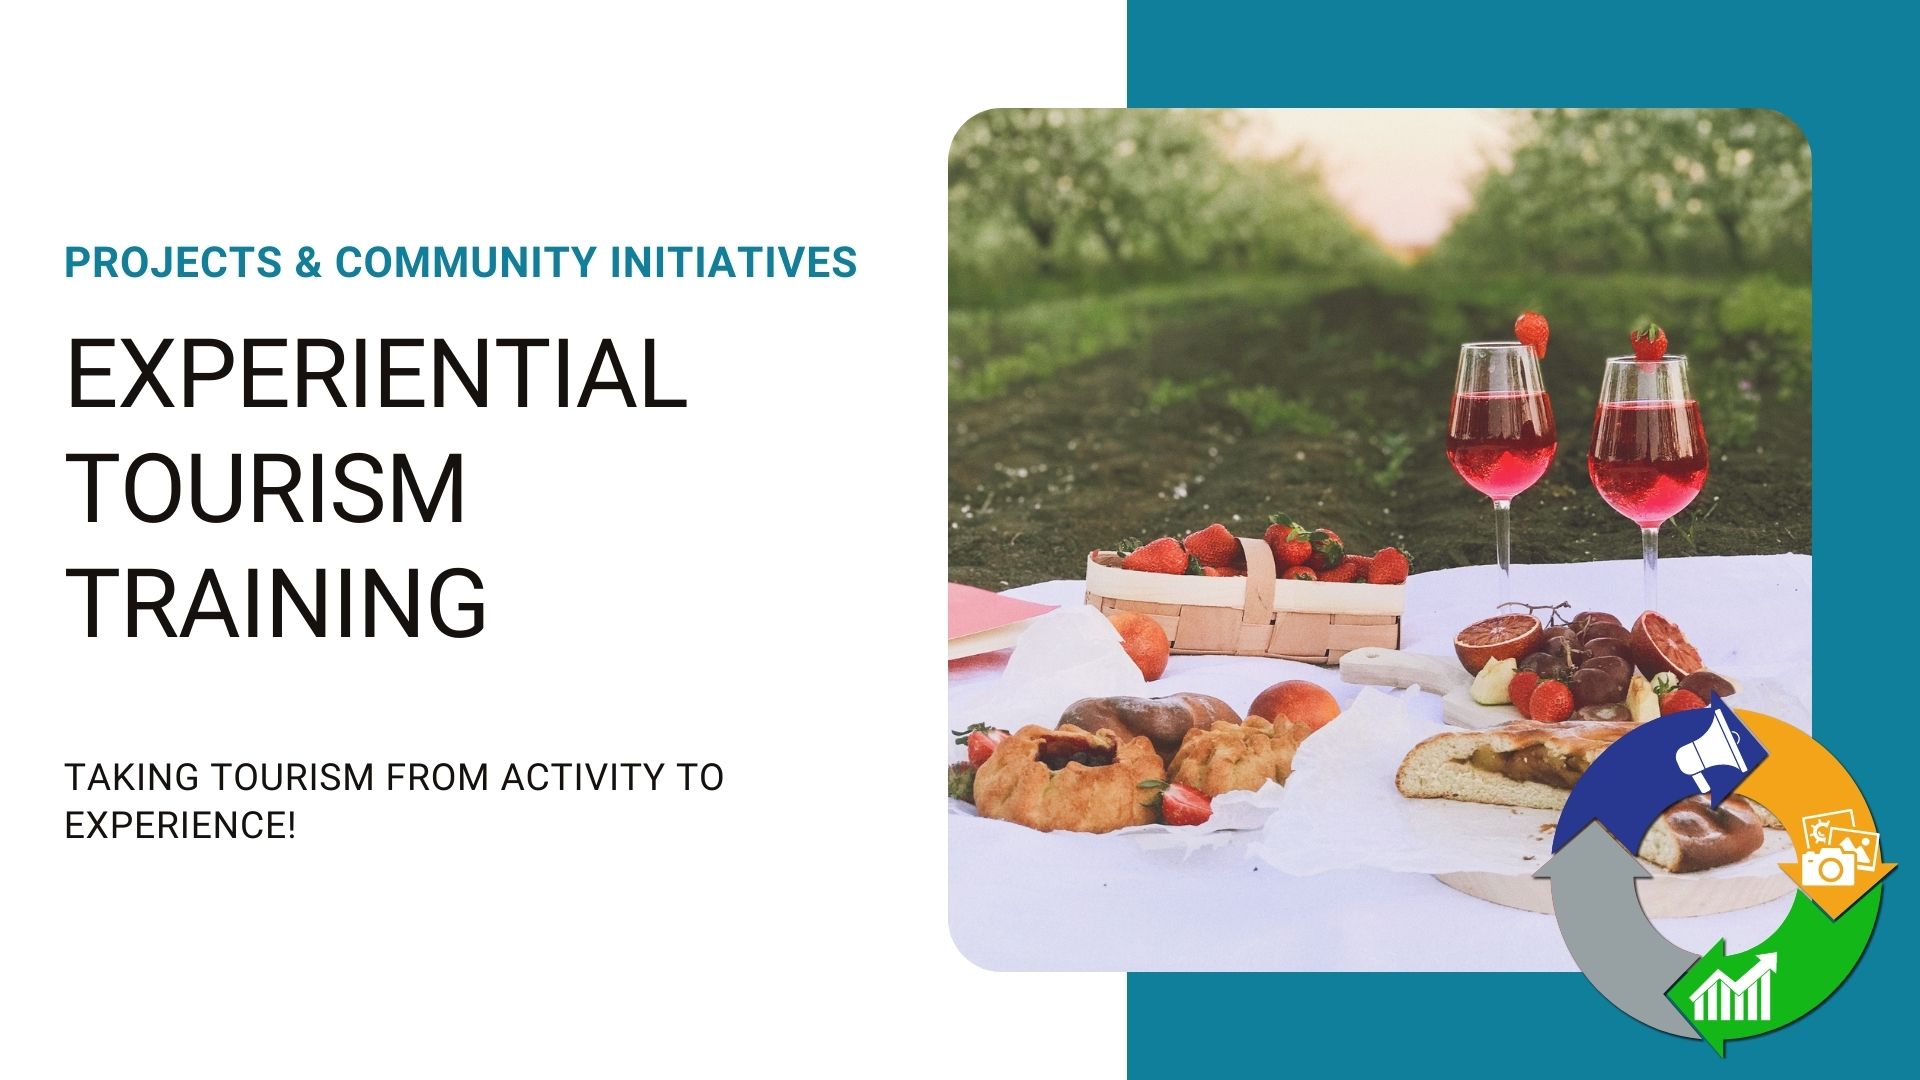 A graphic for Experiential Tourism Training which includes a picture of picnic with glasses of red drink, pastries, and fruits.